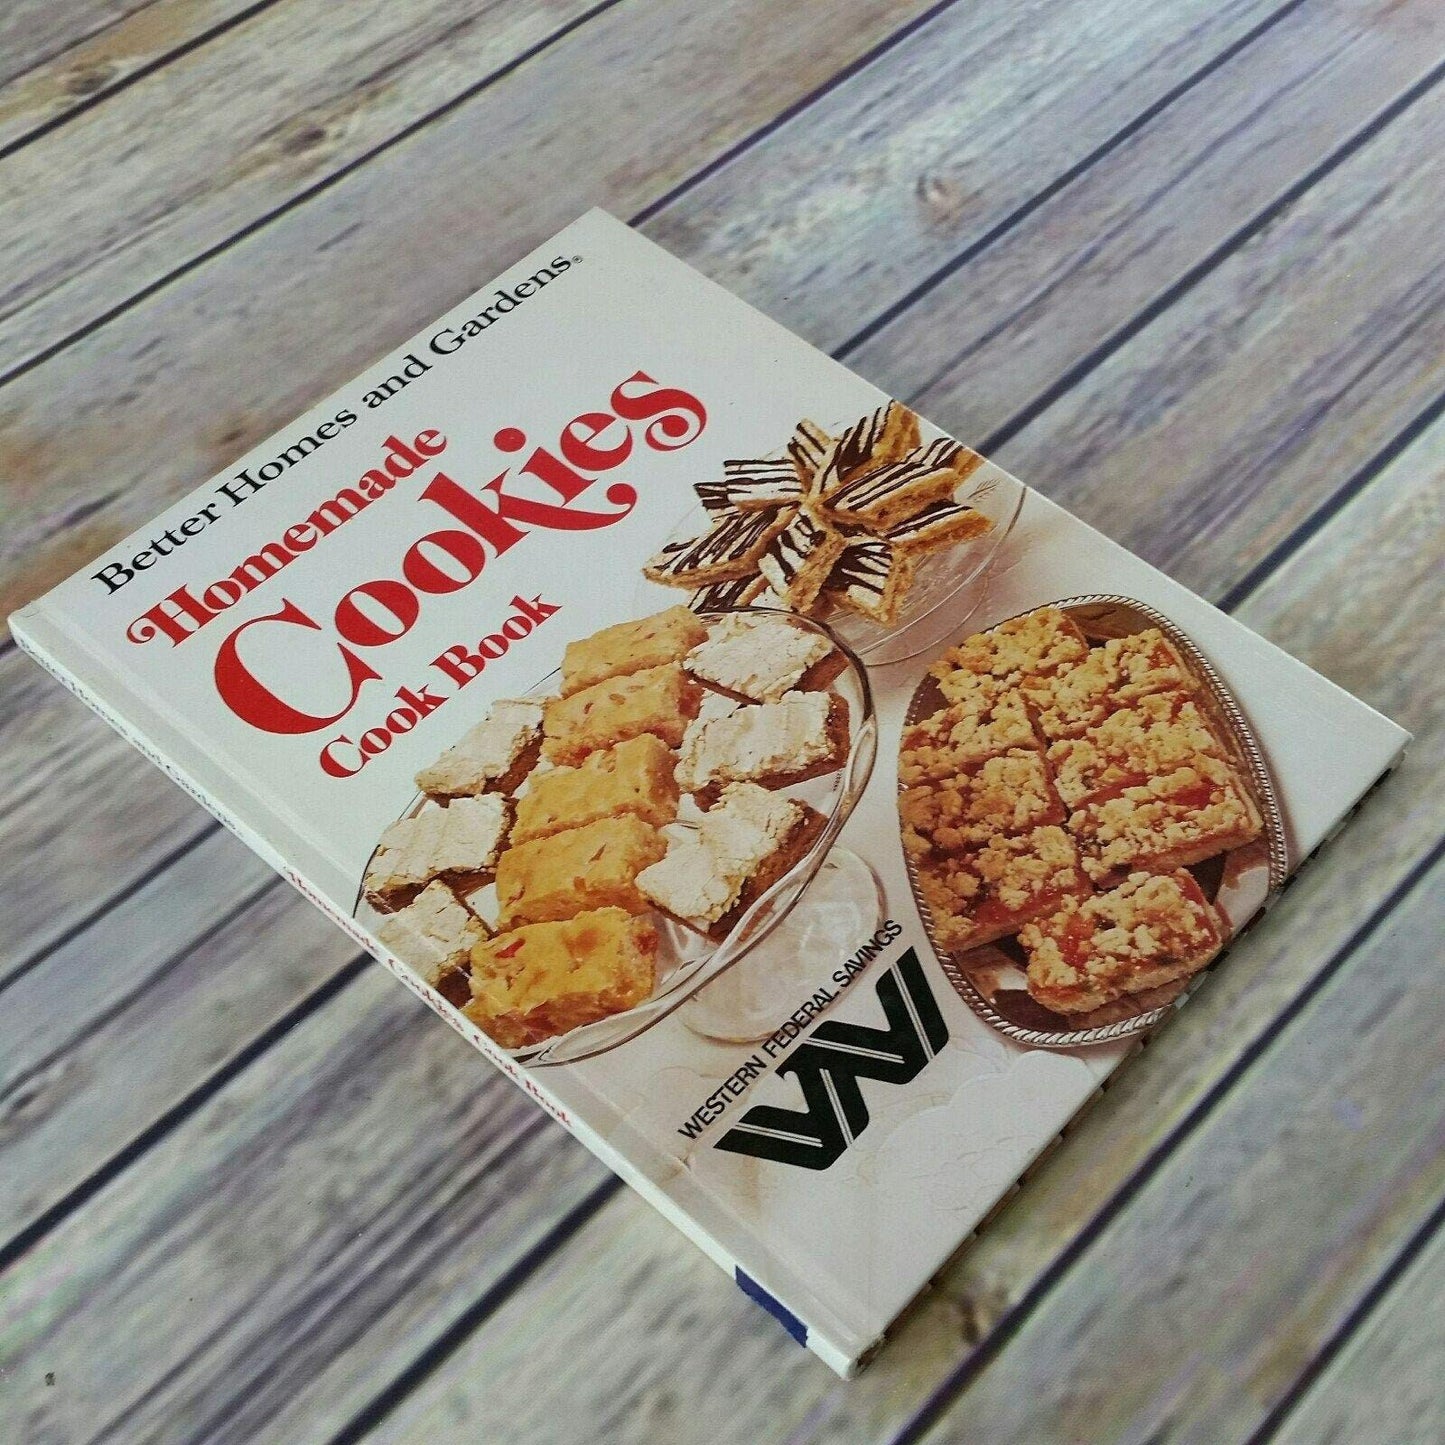 Vintage Cookbook Homemade Cookies Recipes 1978 Better Homes and Gardens 219 Cookie Recipes Western Federal Savings Hardcover NO Dust Cover